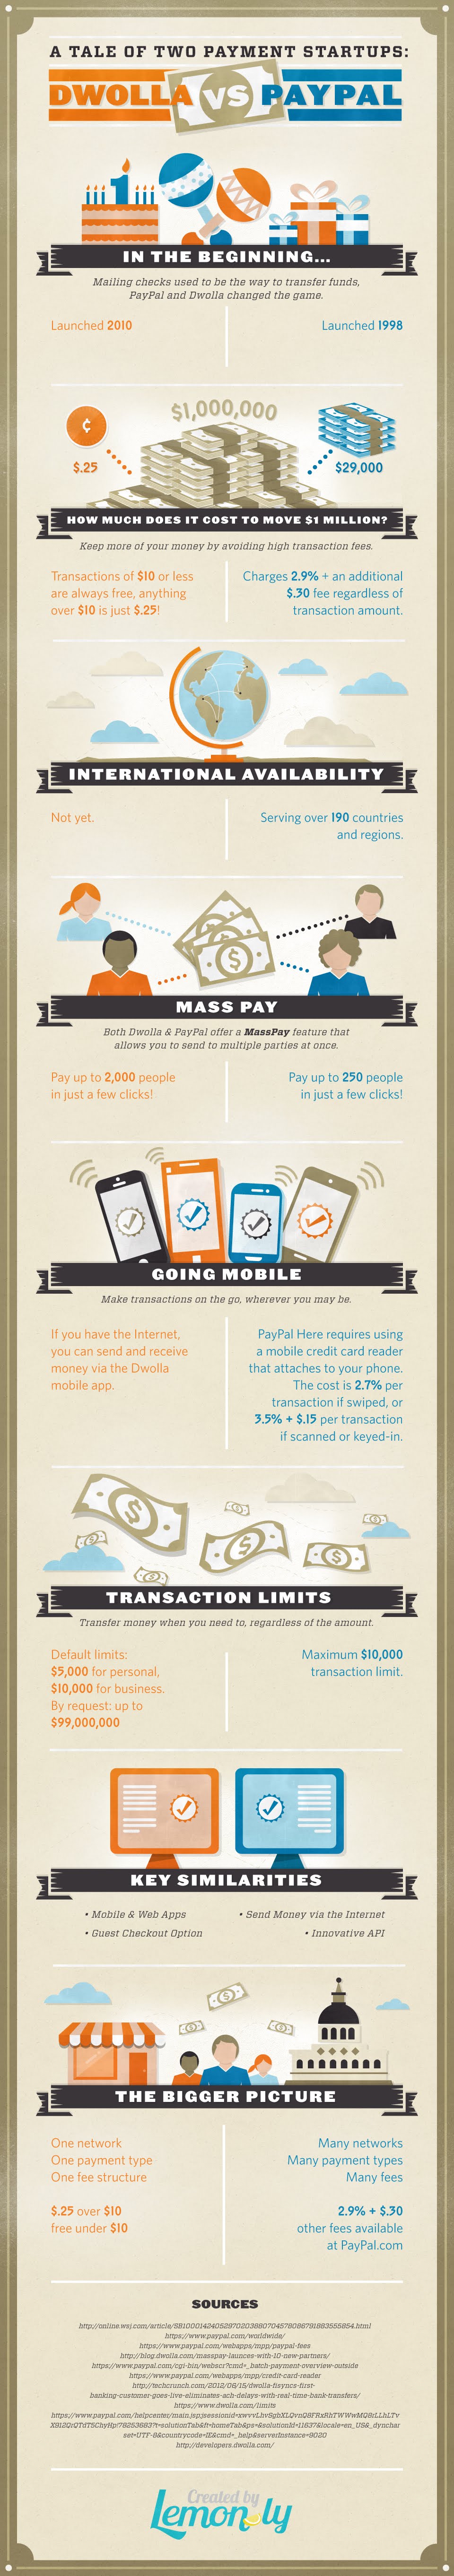 A Tale Of Two Payment Startups DWOLLA VS PAYPAL #infographic 